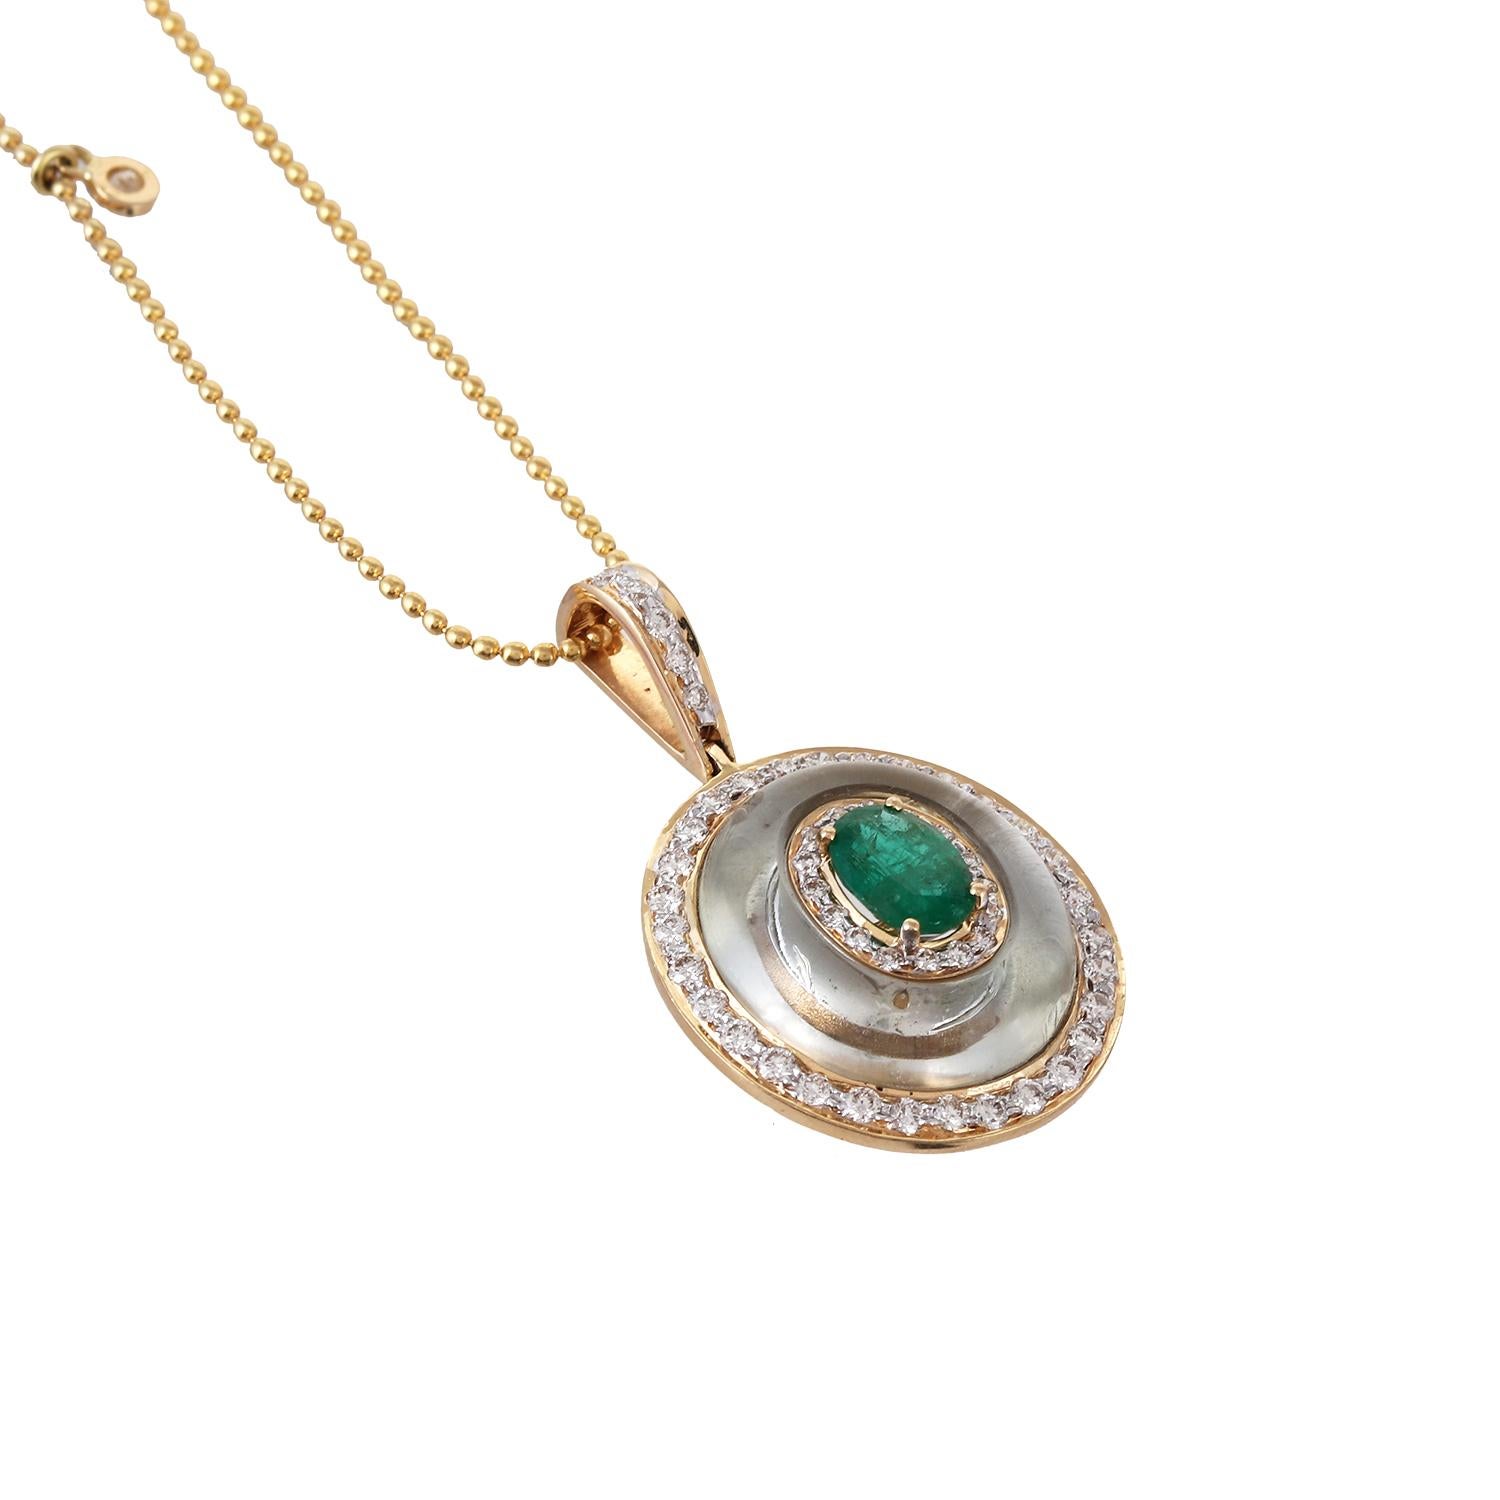 Oval Cut 1.12 Carat Emerald Pressiolite And Diamond 18kt Yellow Gold Pendant Necklace For Sale